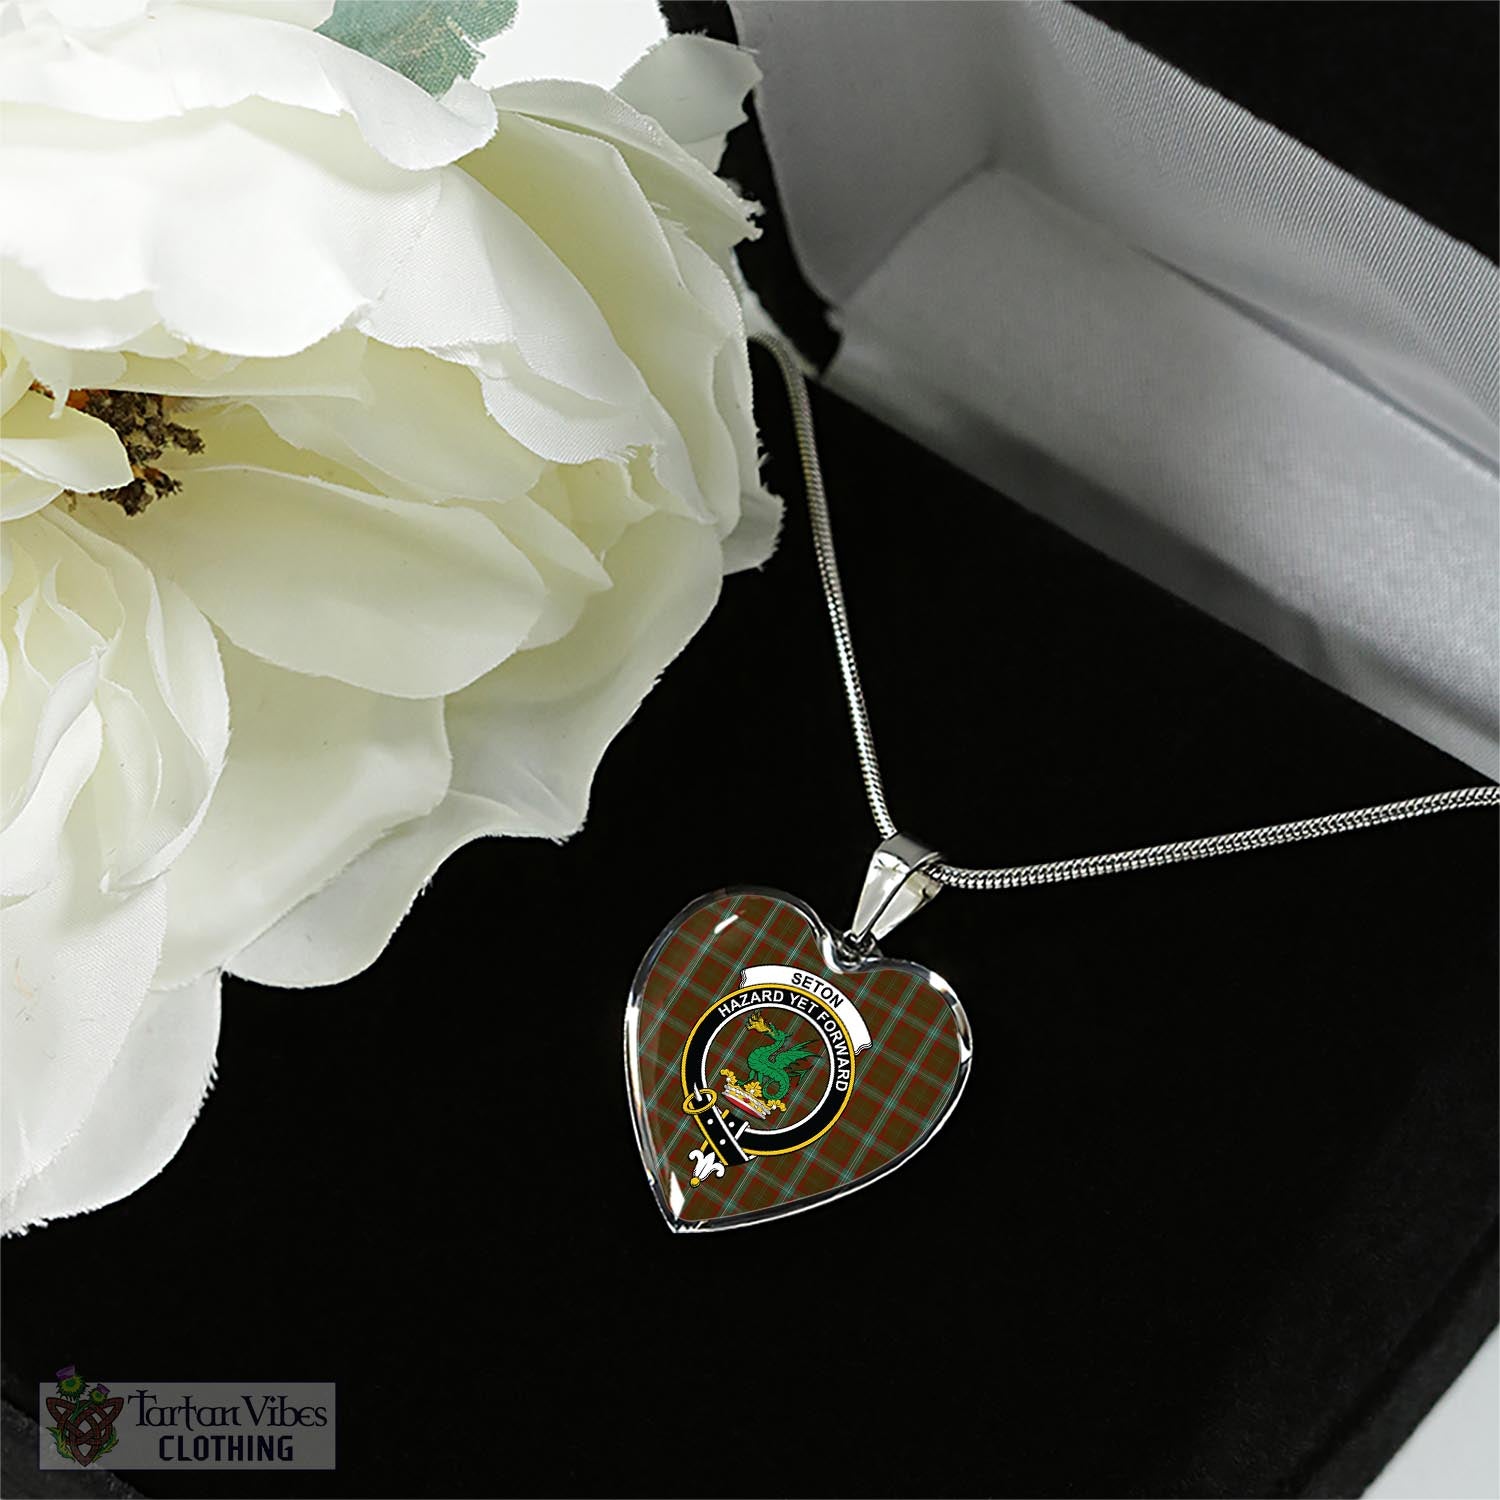 Tartan Vibes Clothing Seton Hunting Tartan Heart Necklace with Family Crest